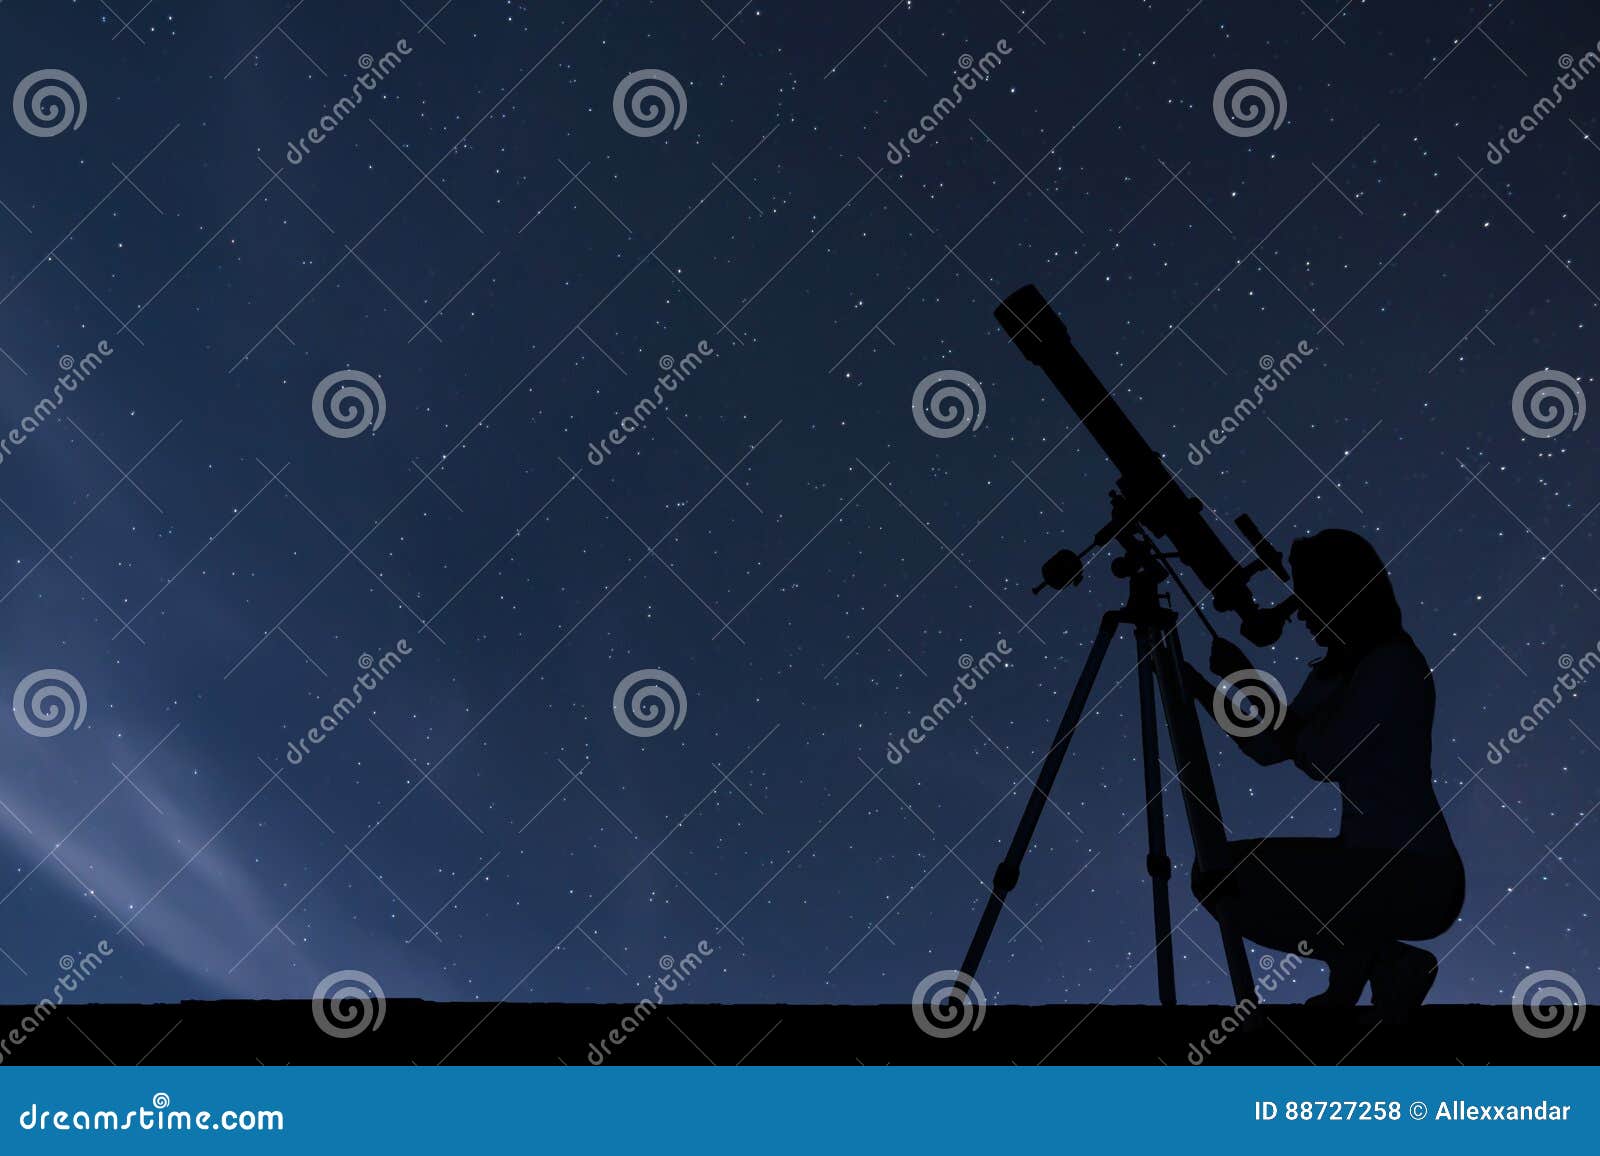 Girl Looking At The Stars With Telescope Starry Night Sky Stock